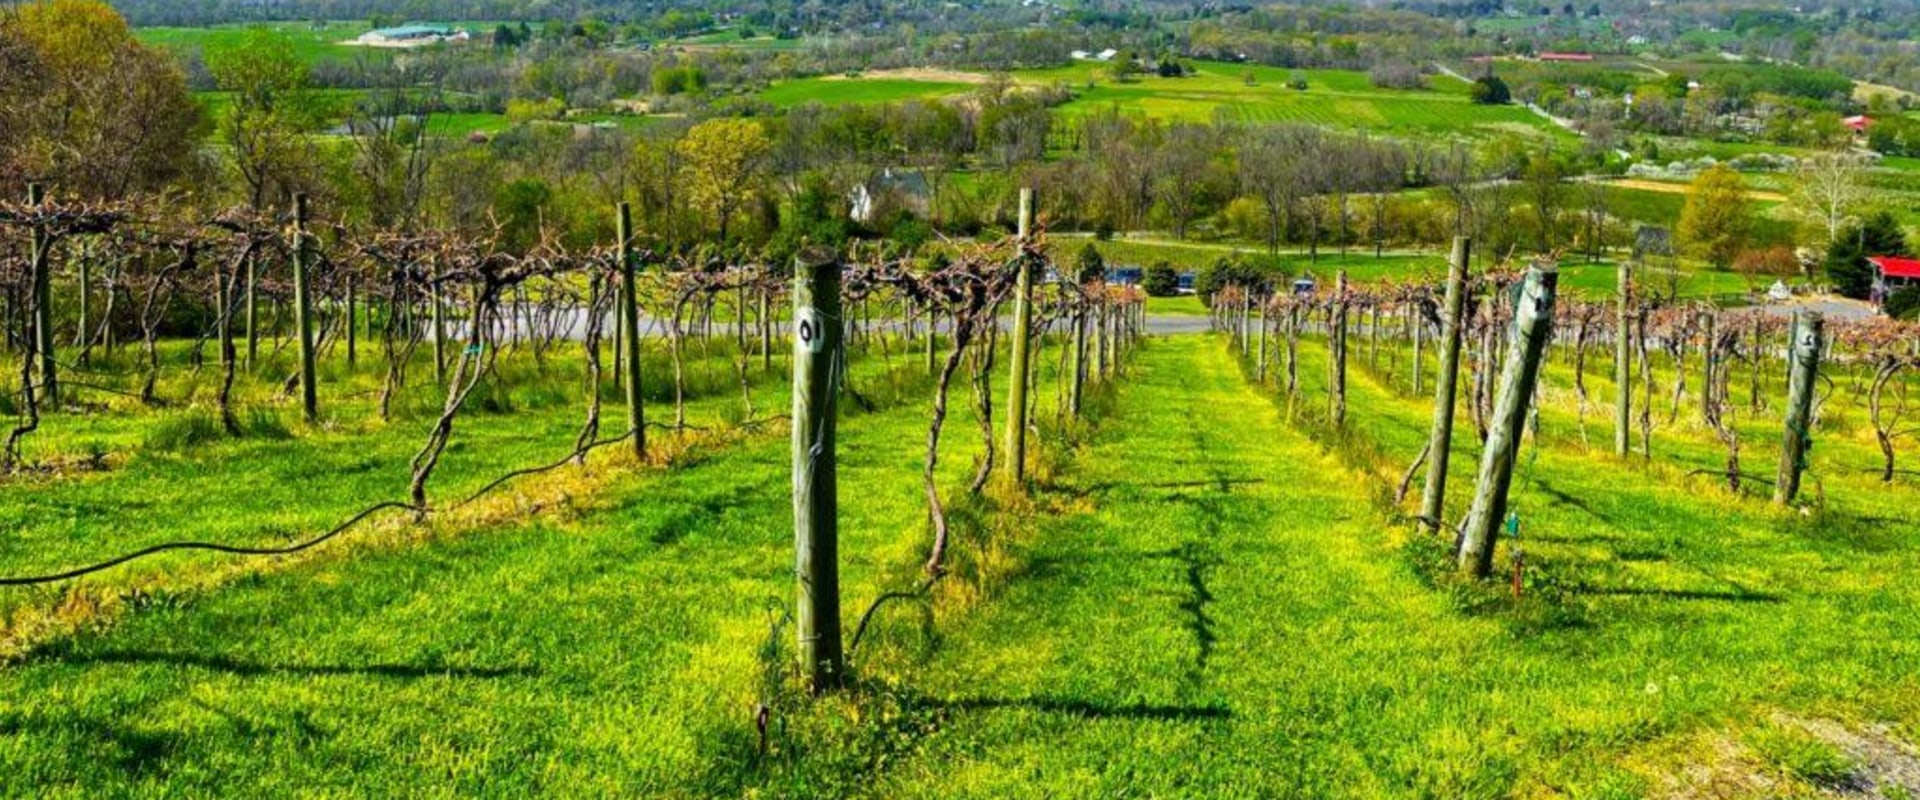 The Best Time to Visit the Vineyards in Dulles, Virginia